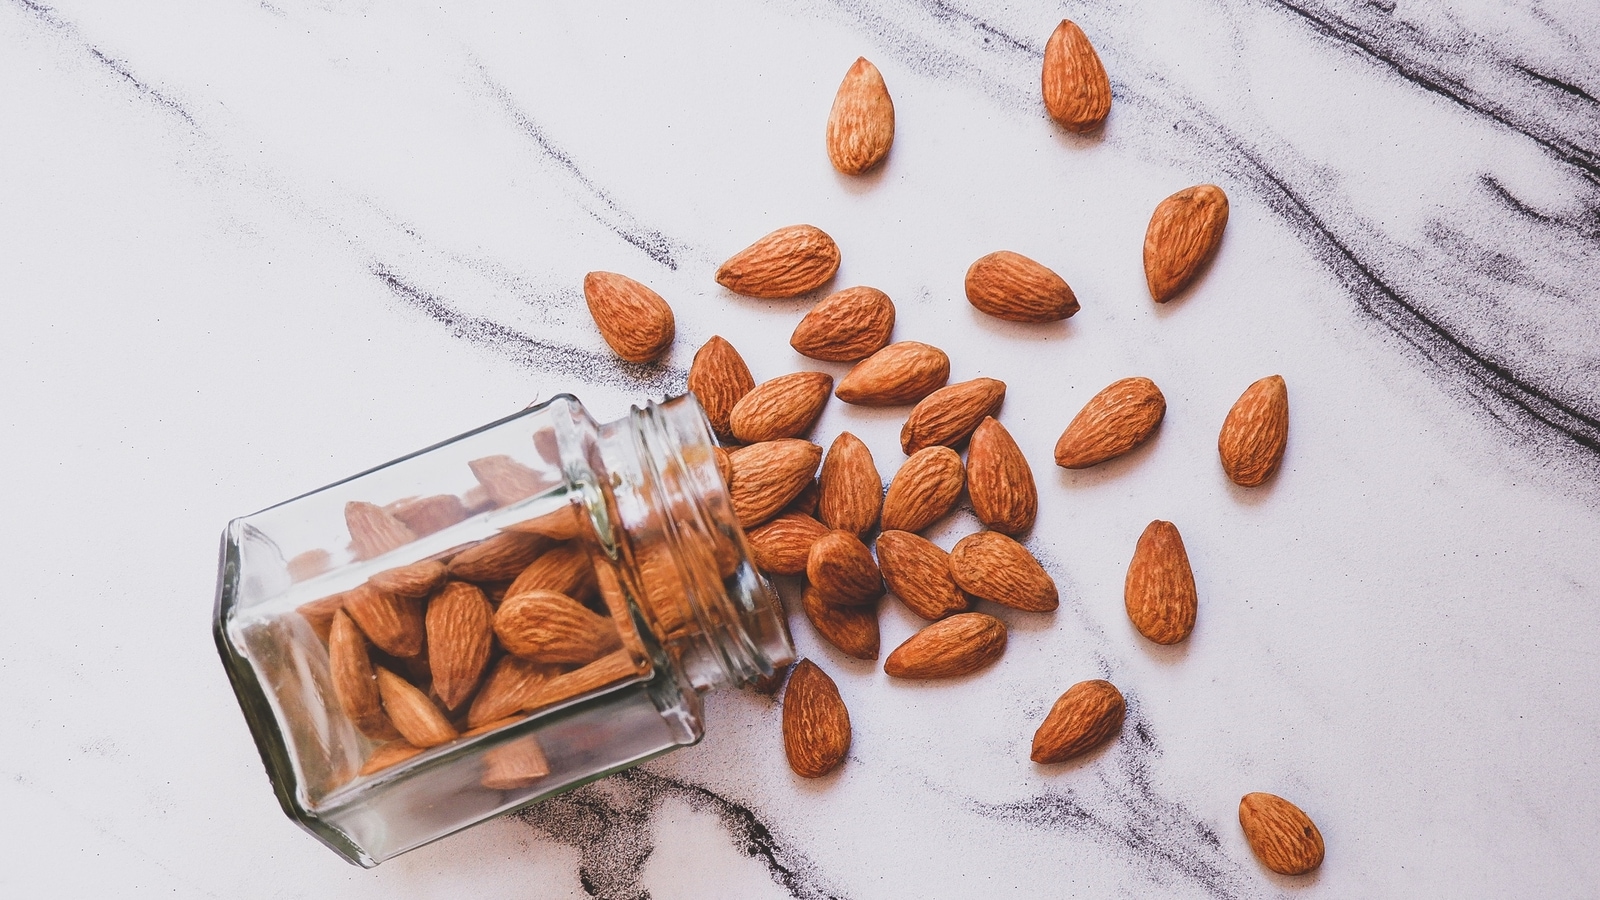 consuming-almonds-can-boost-your-gut-health-study